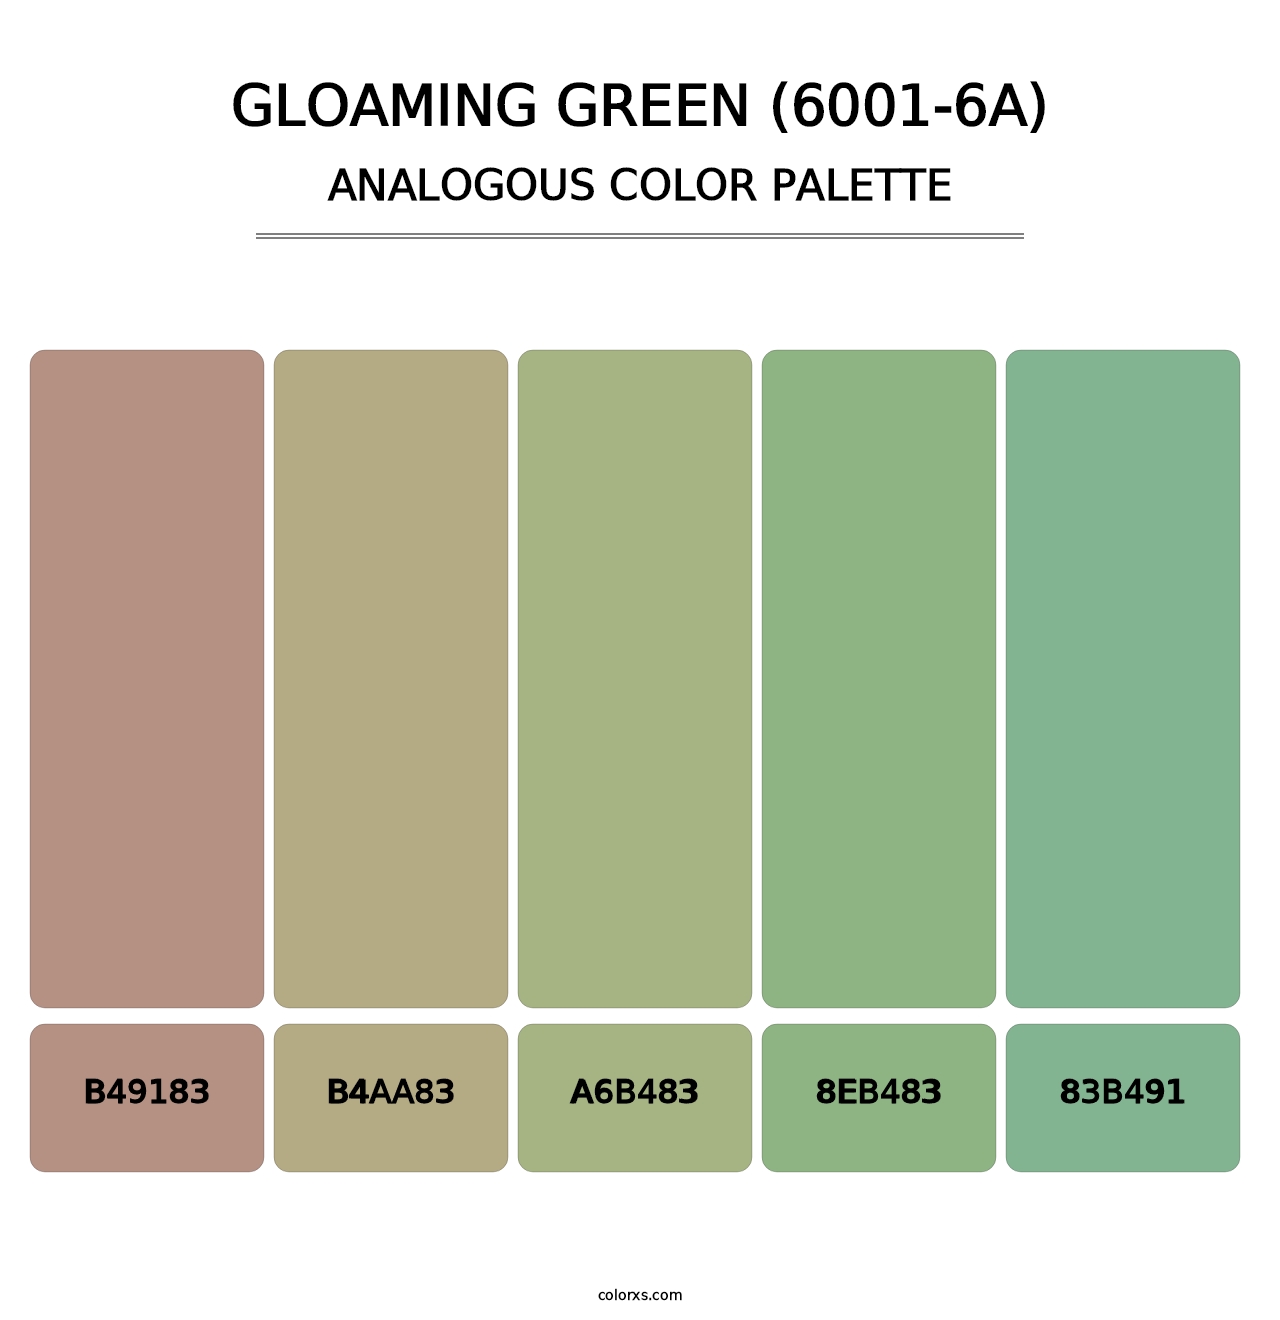 Gloaming Green (6001-6A) - Analogous Color Palette